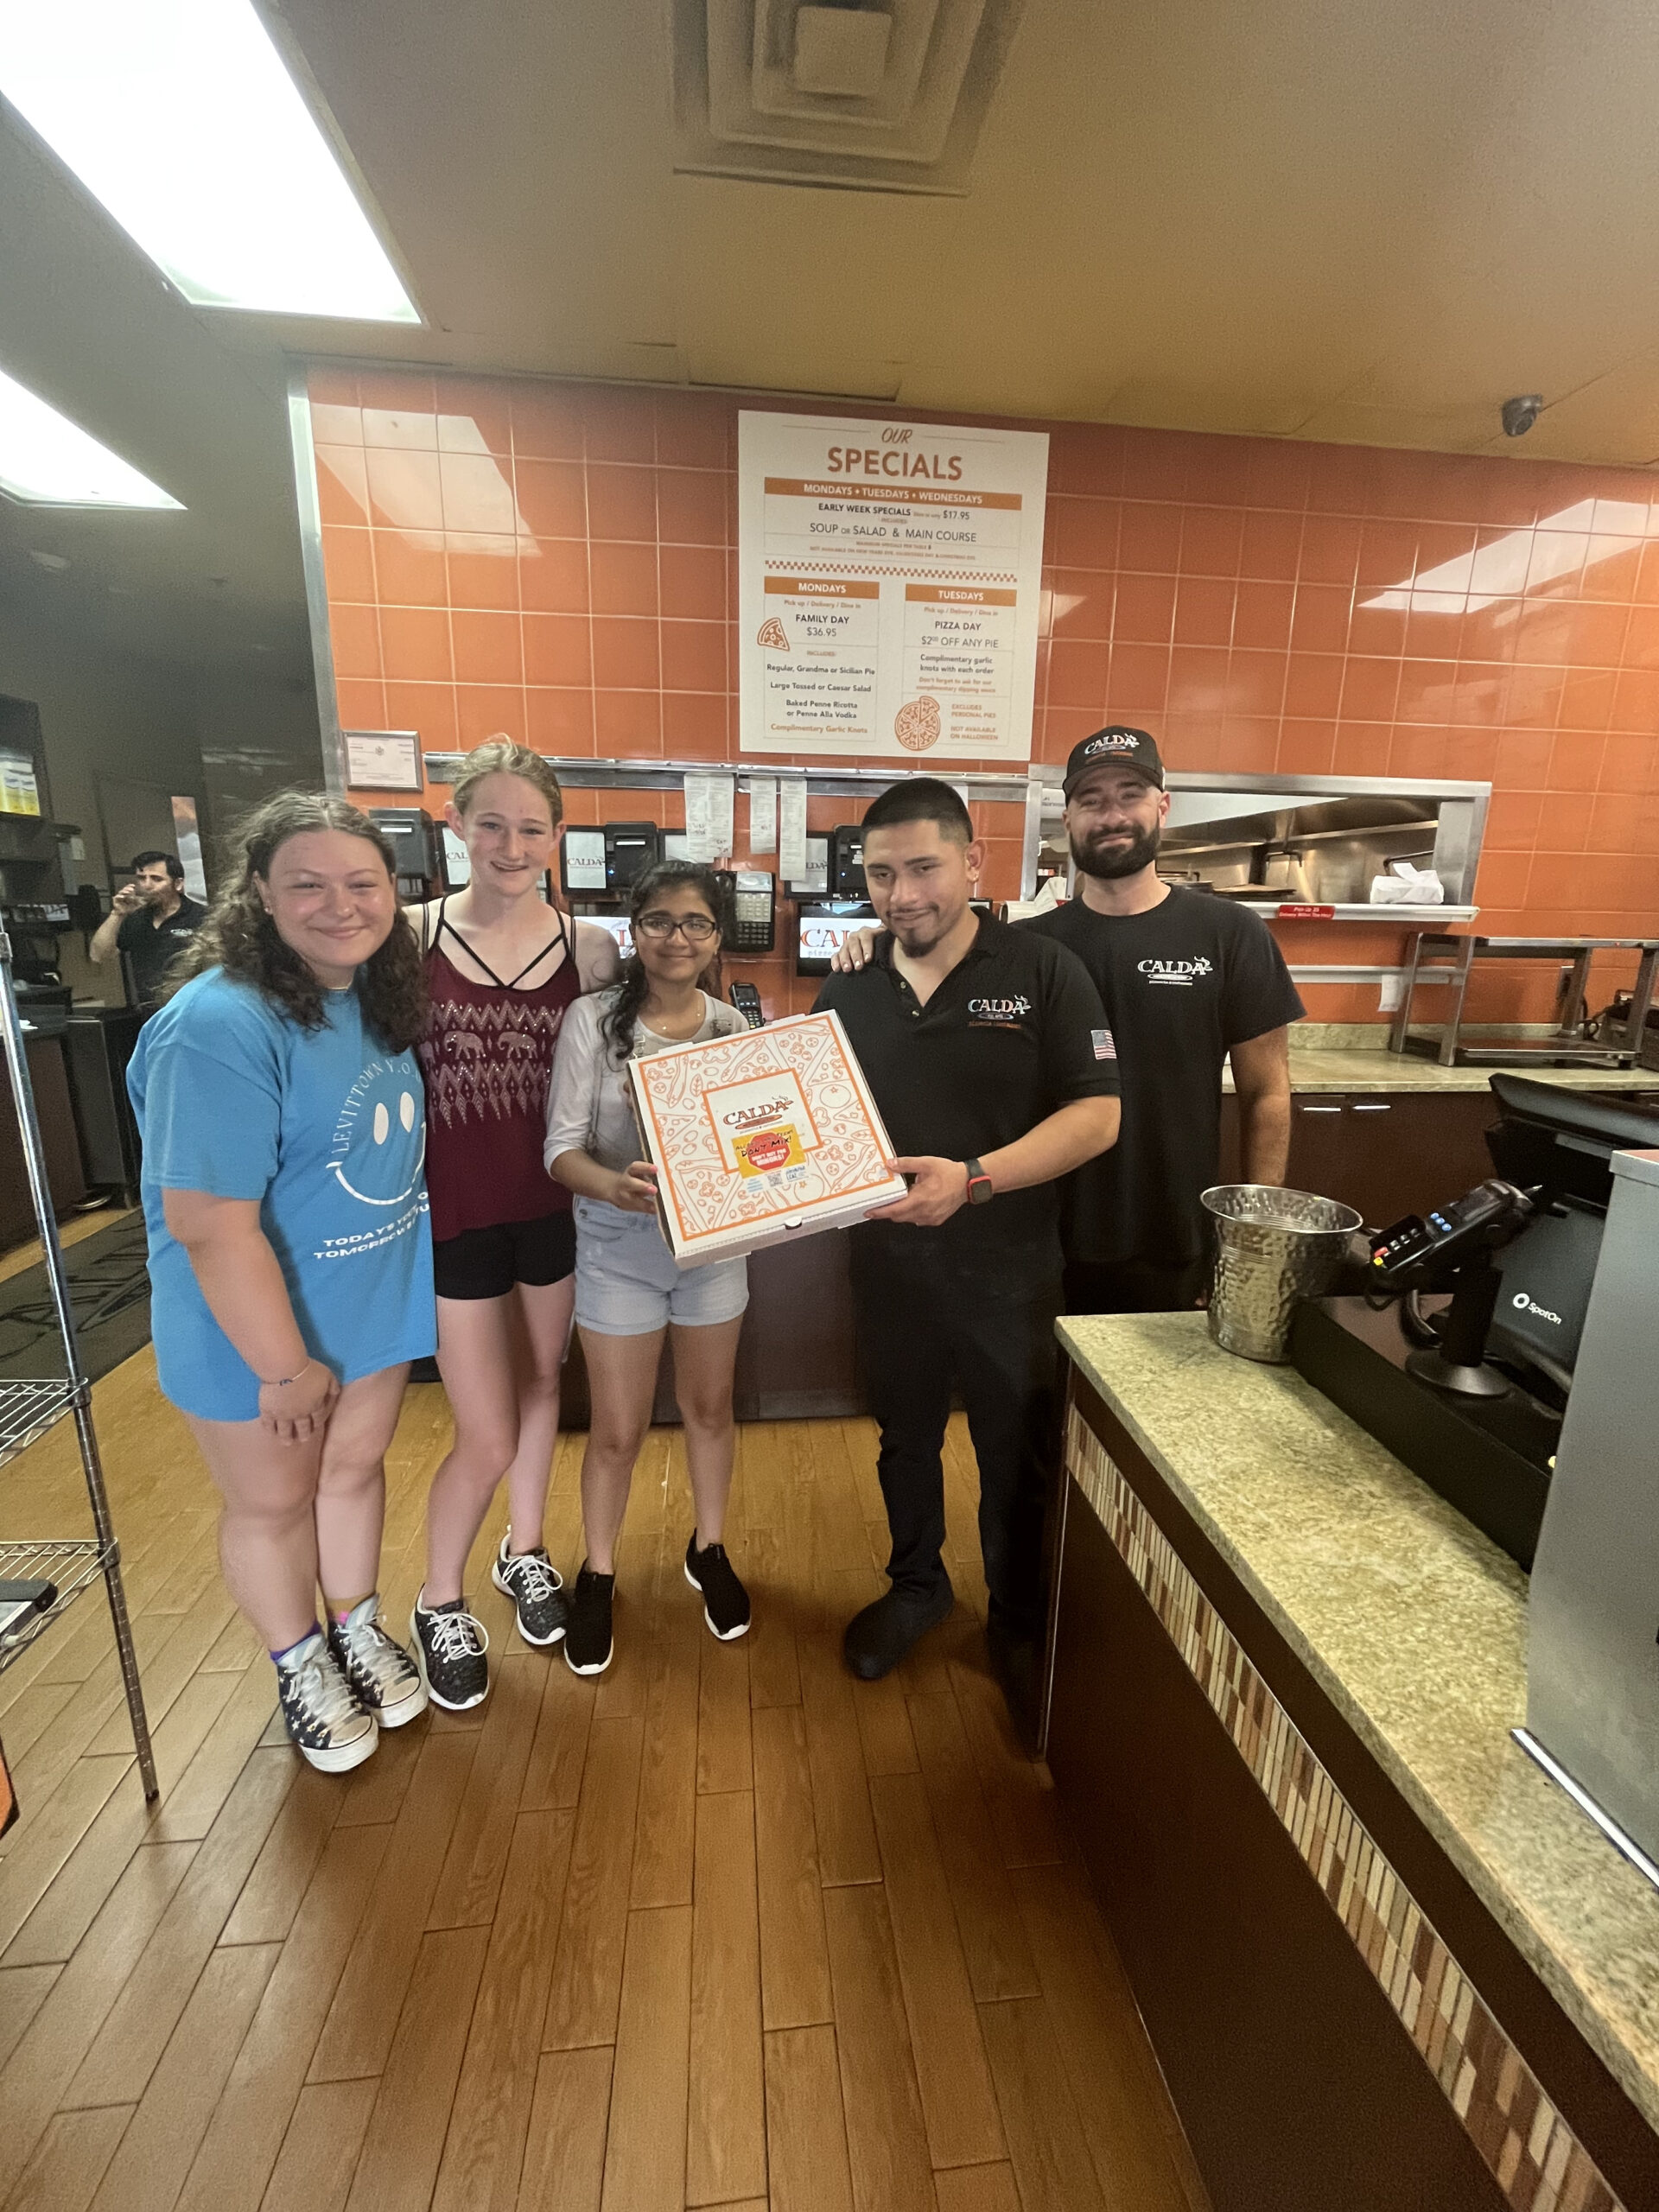 Students visit local pizzeria with prevention resources